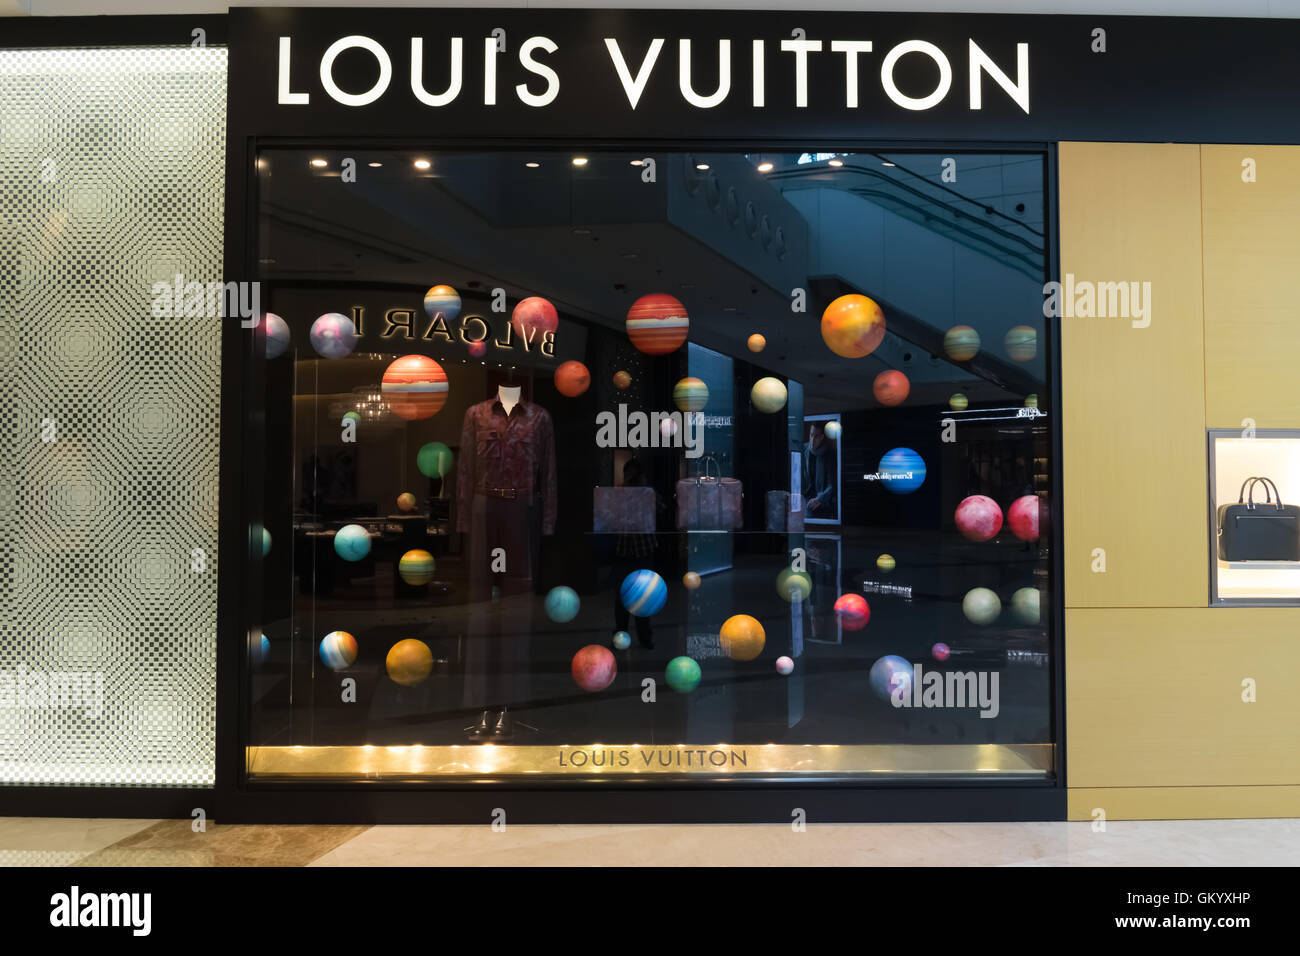 Louis Vuitton at Elements Mall, Hong Stock Photo - Alamy